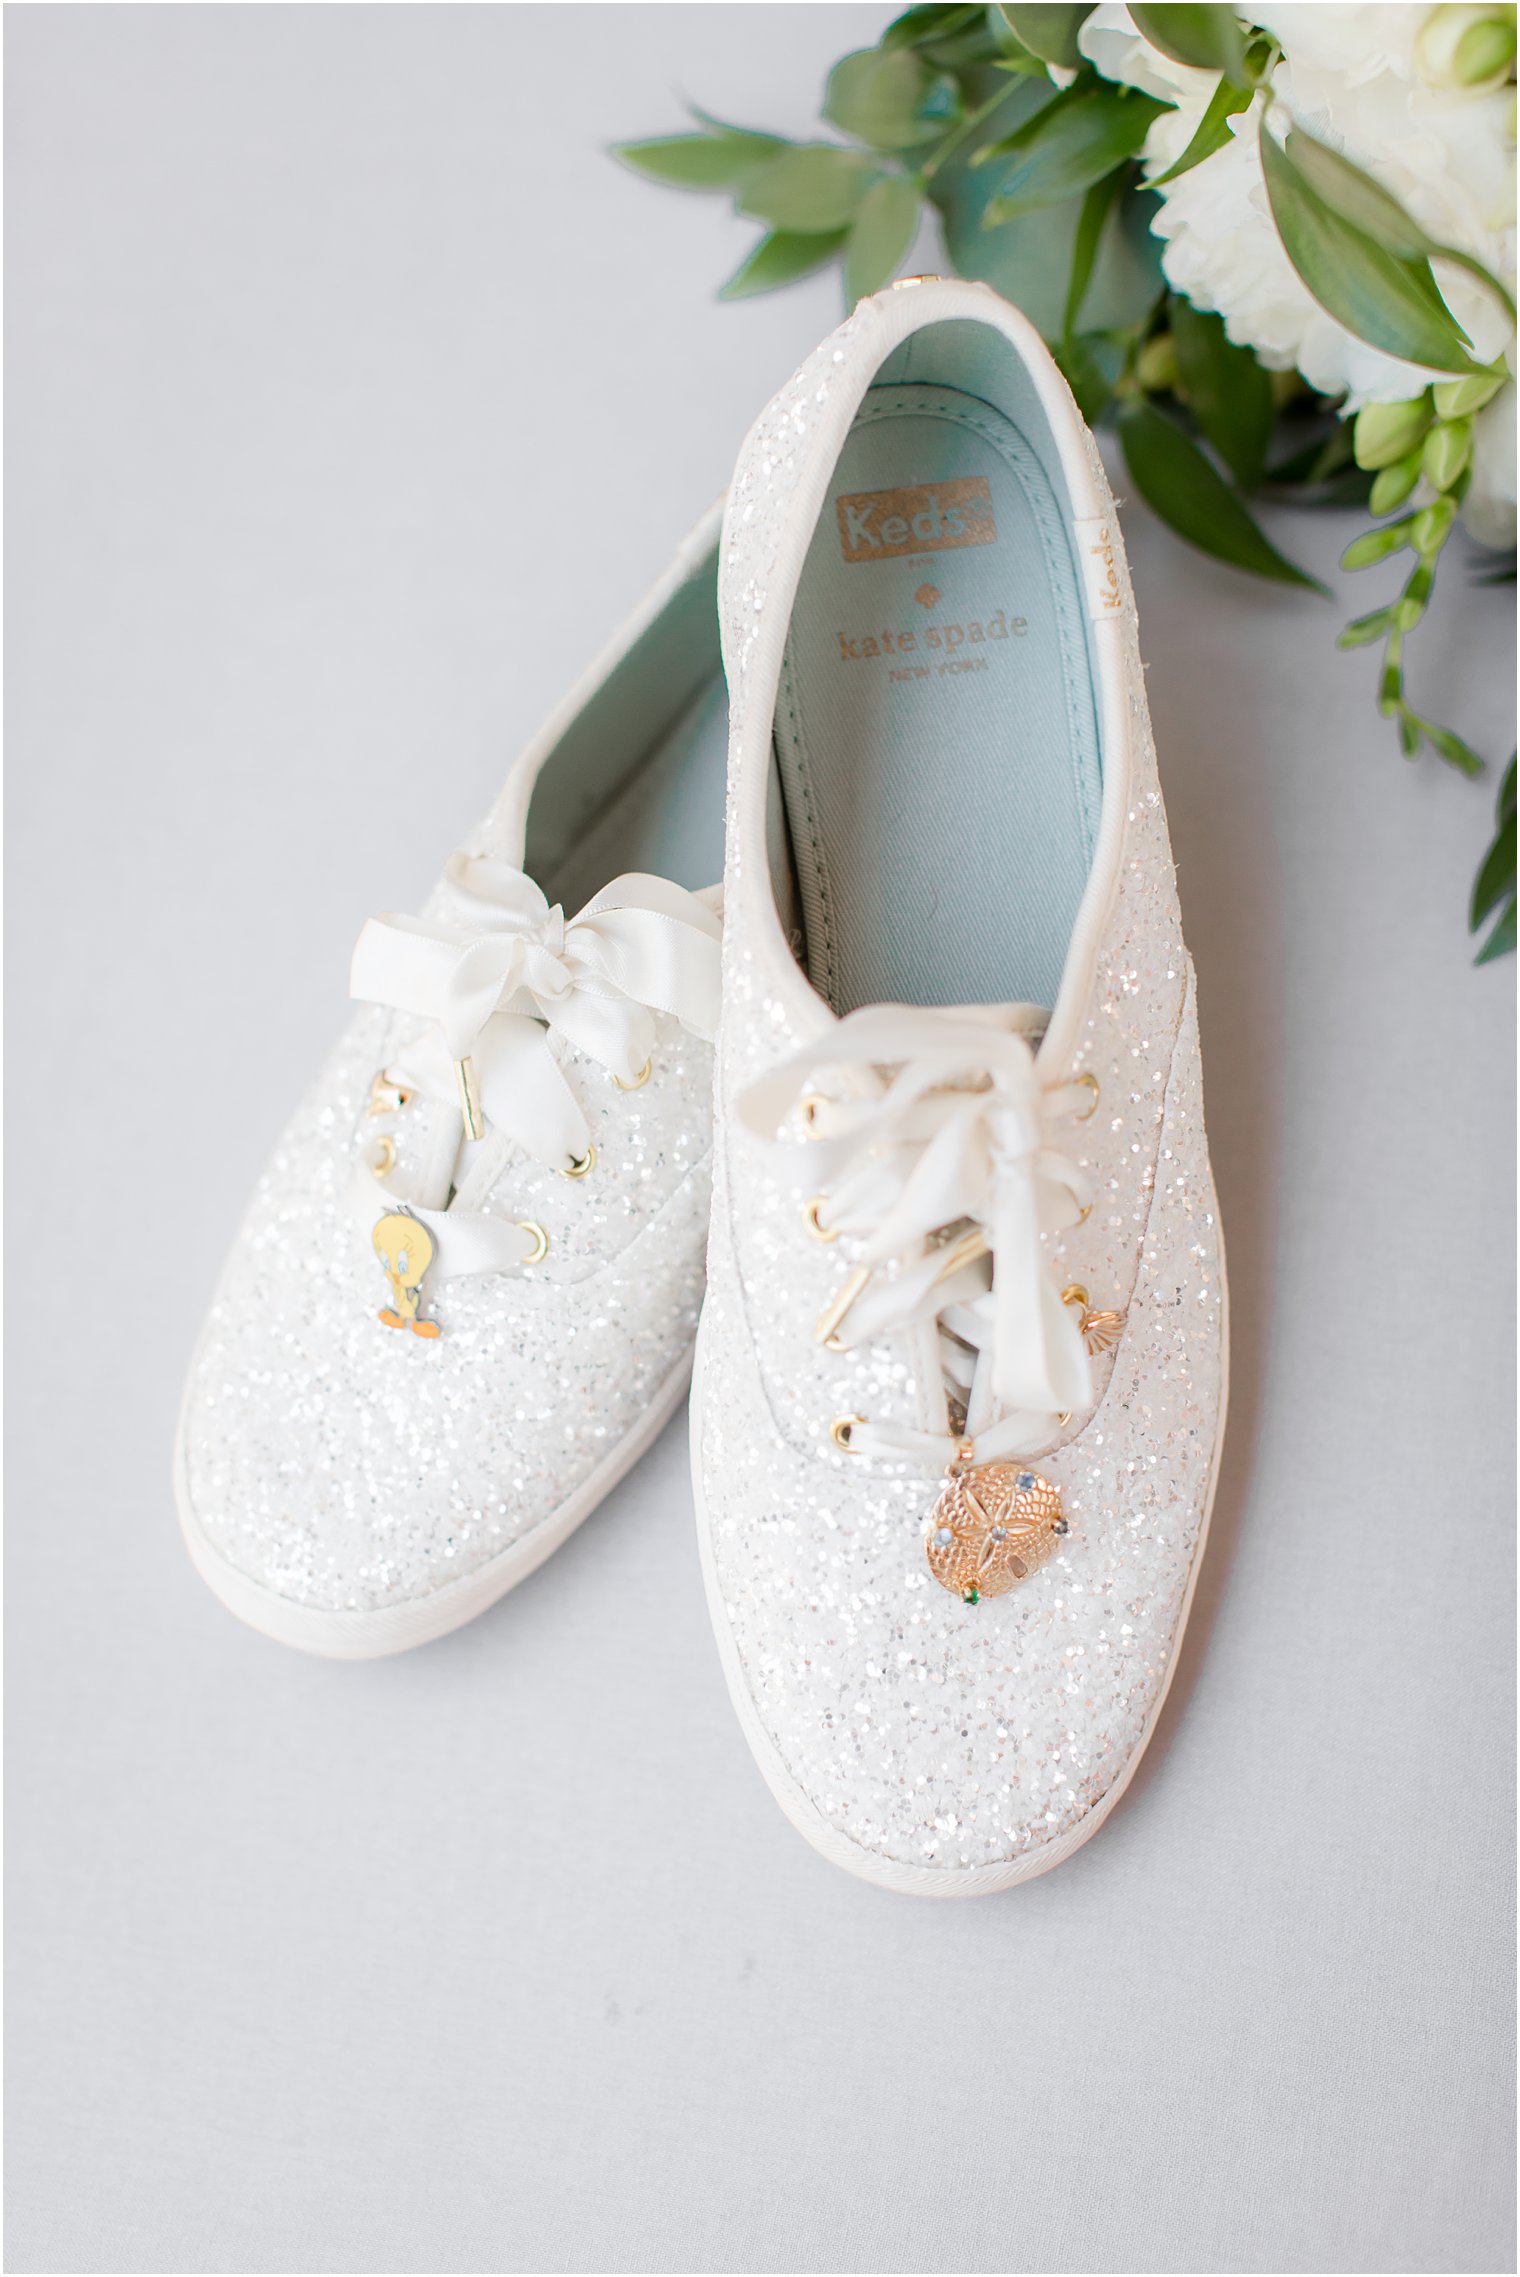 Keds by Kate Spade glitter sneakers